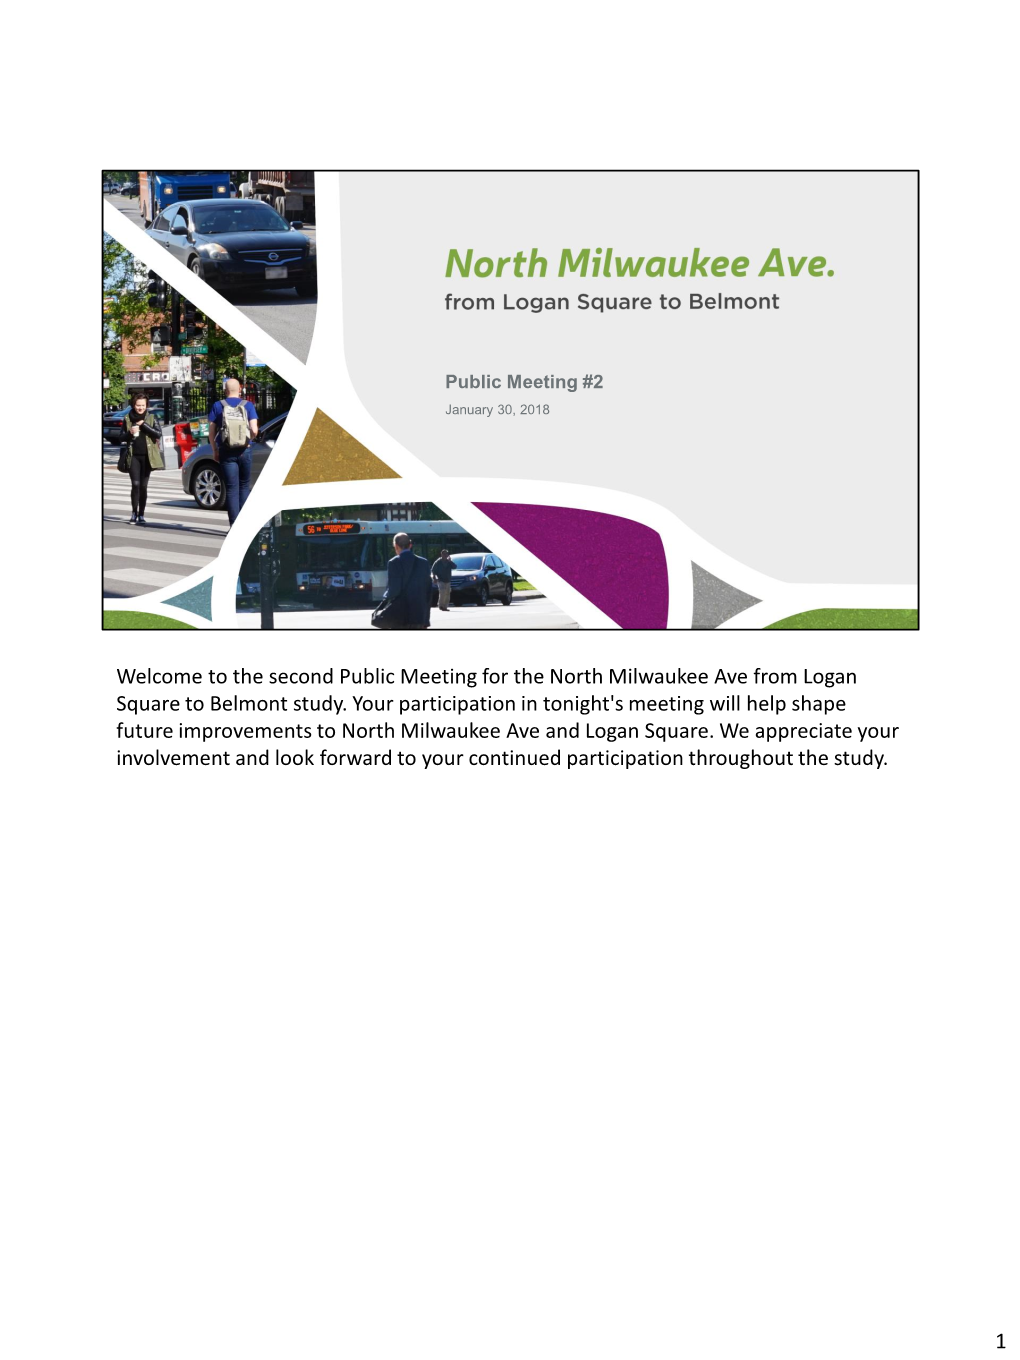 The Second Public Meeting for the North Milwaukee Ave from Logan Square to Belmont Study